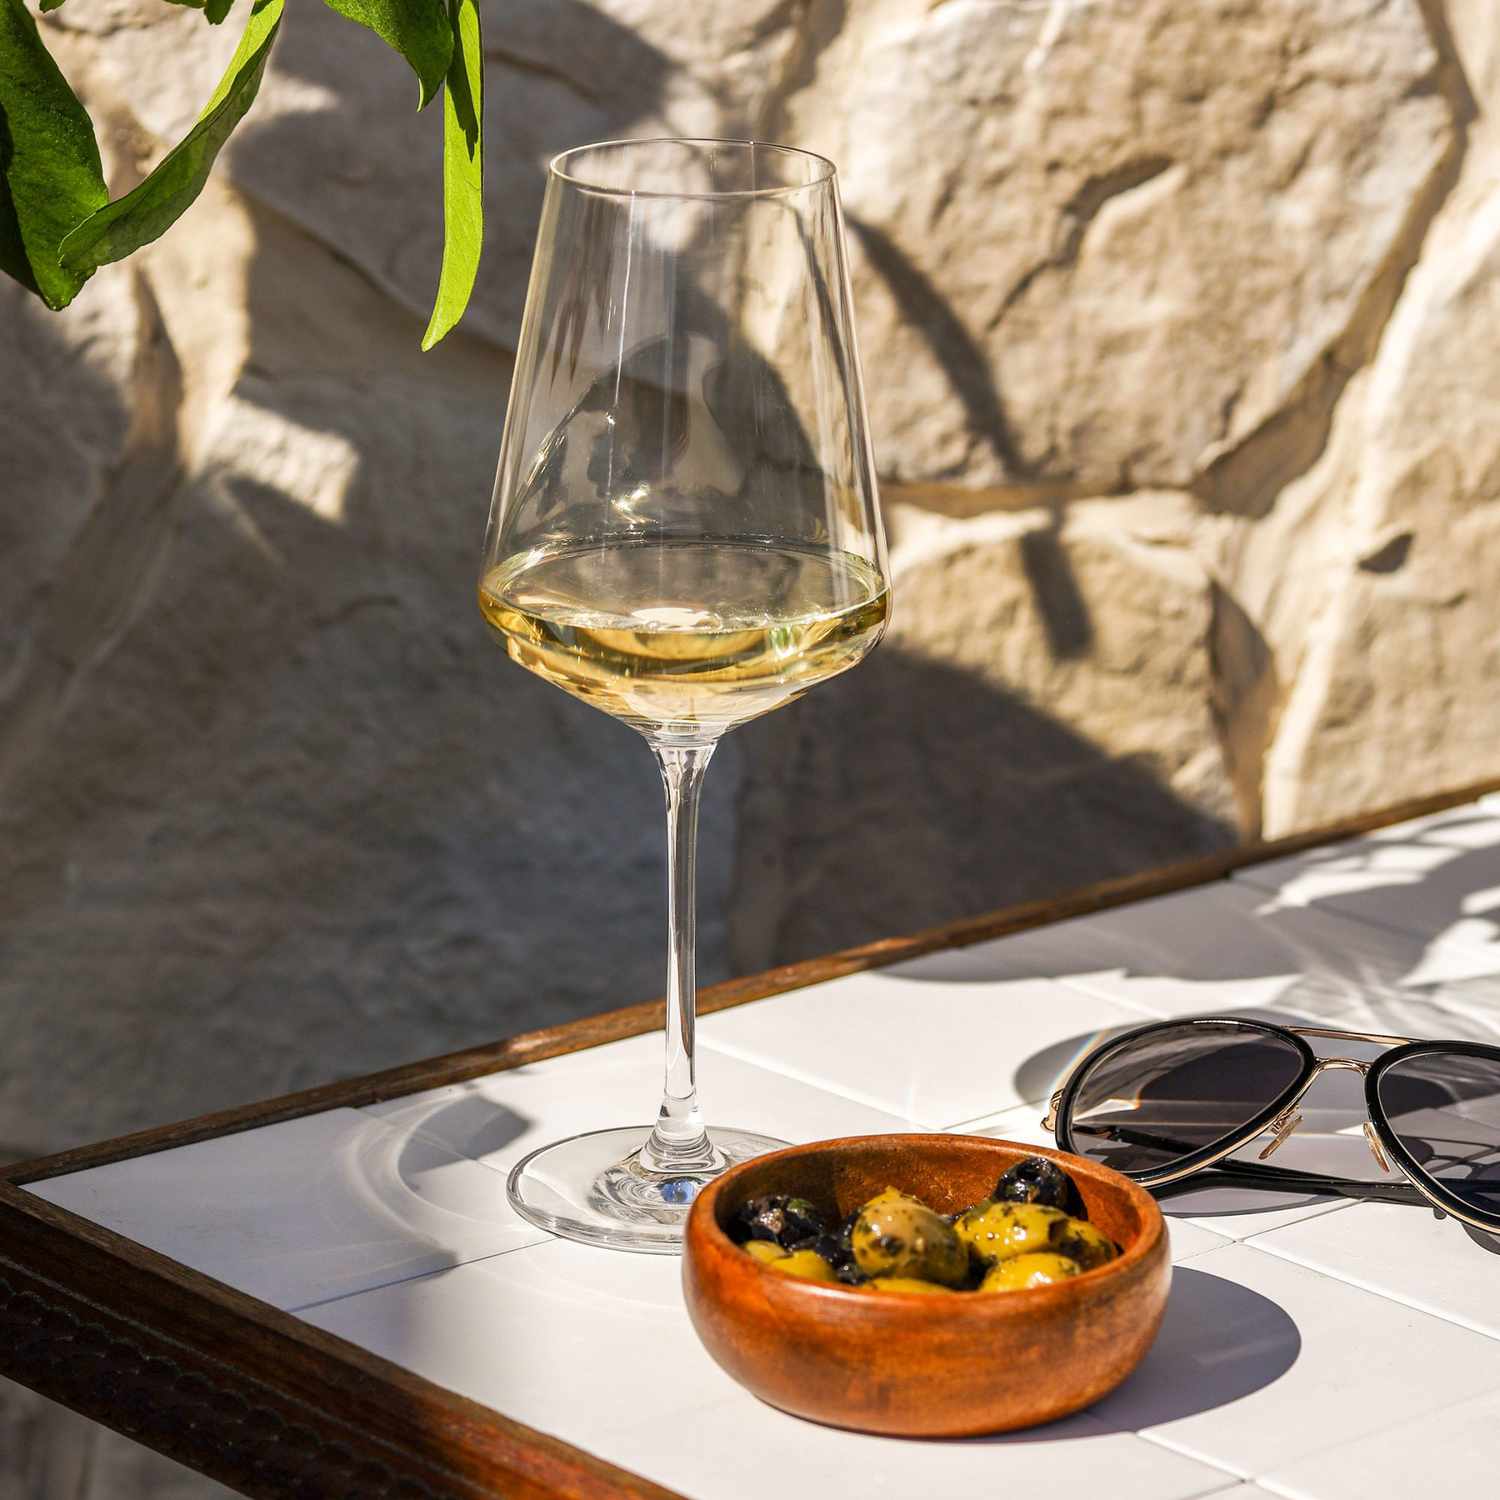 Image of Malvazija wine in a glass with olives on a table